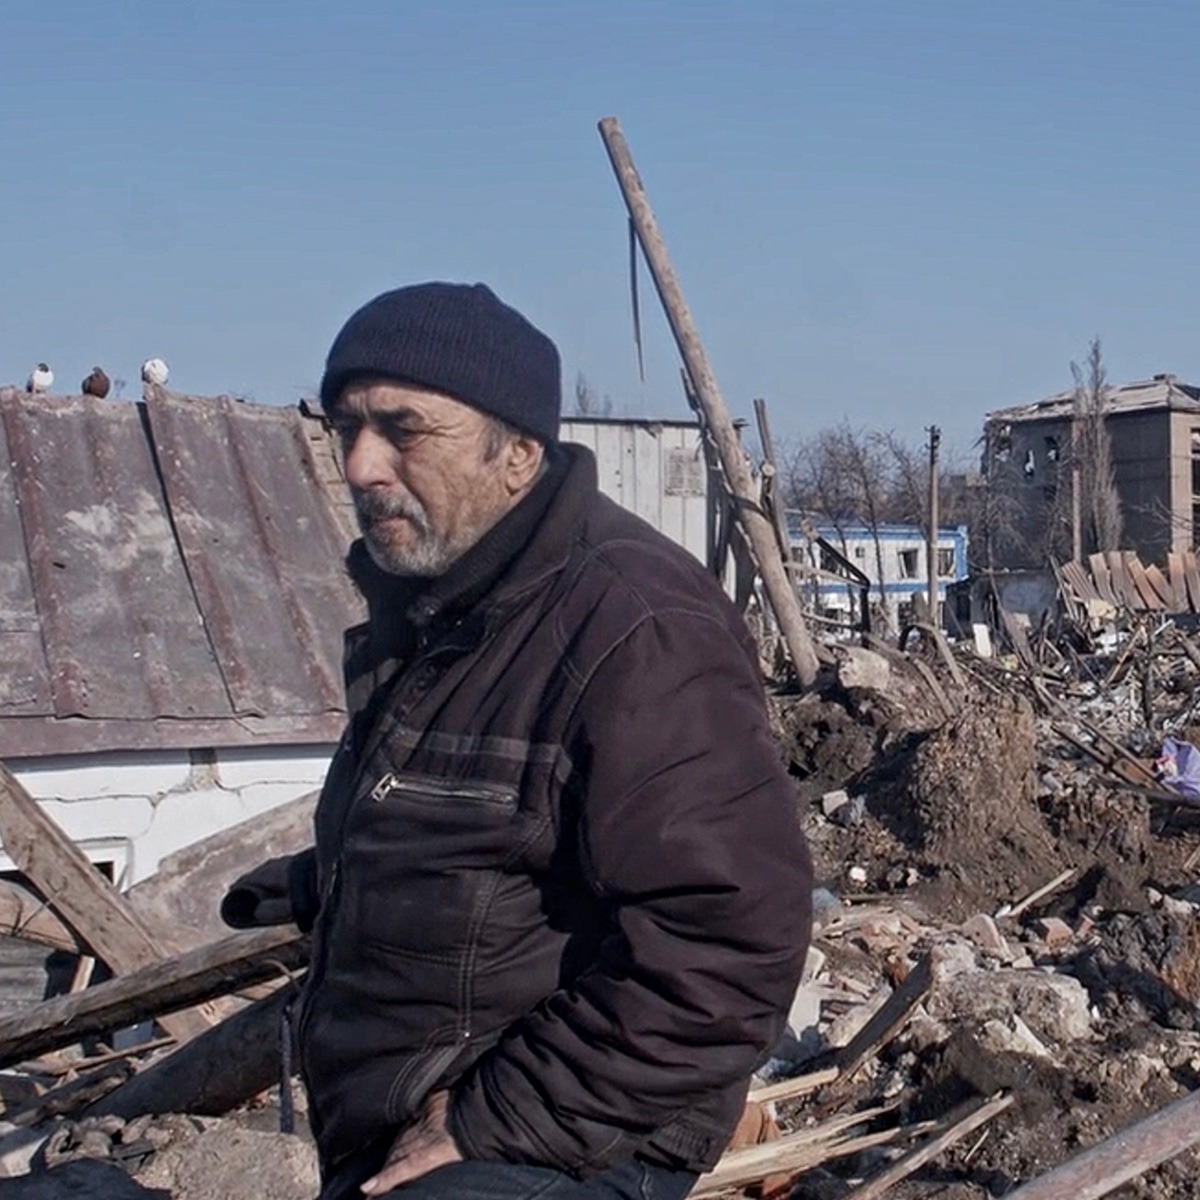 a man standing in front of a pile of rubble and destroyed buildings.